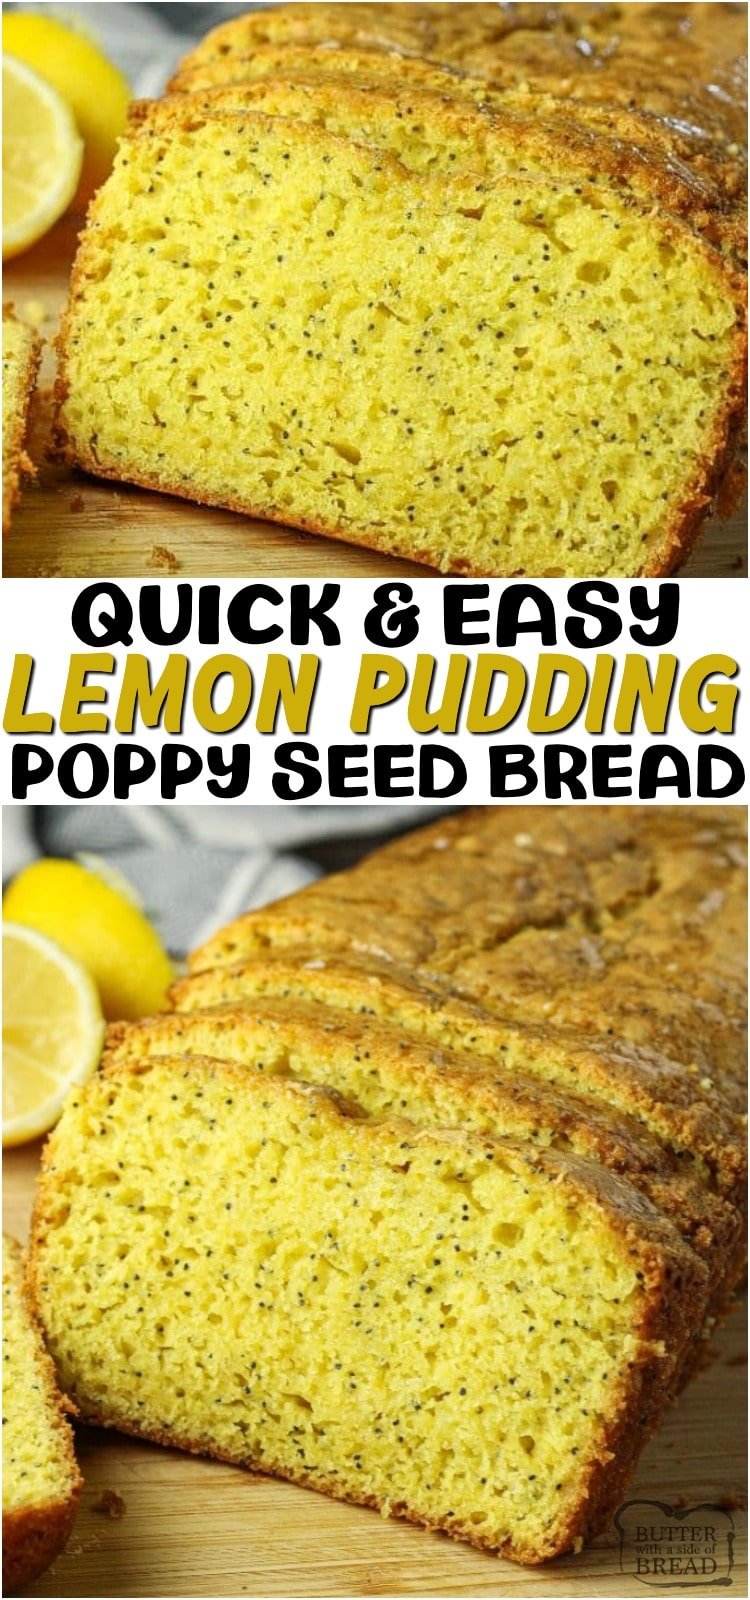 Easy Lemon Poppy Seed Bread is a simple, sweet bread recipe that is made with just a few ingredients. Using a cake mix and lemon pudding, makes this bread come together fast. This simple quick bread recipe will be one you will want to make over and over again.